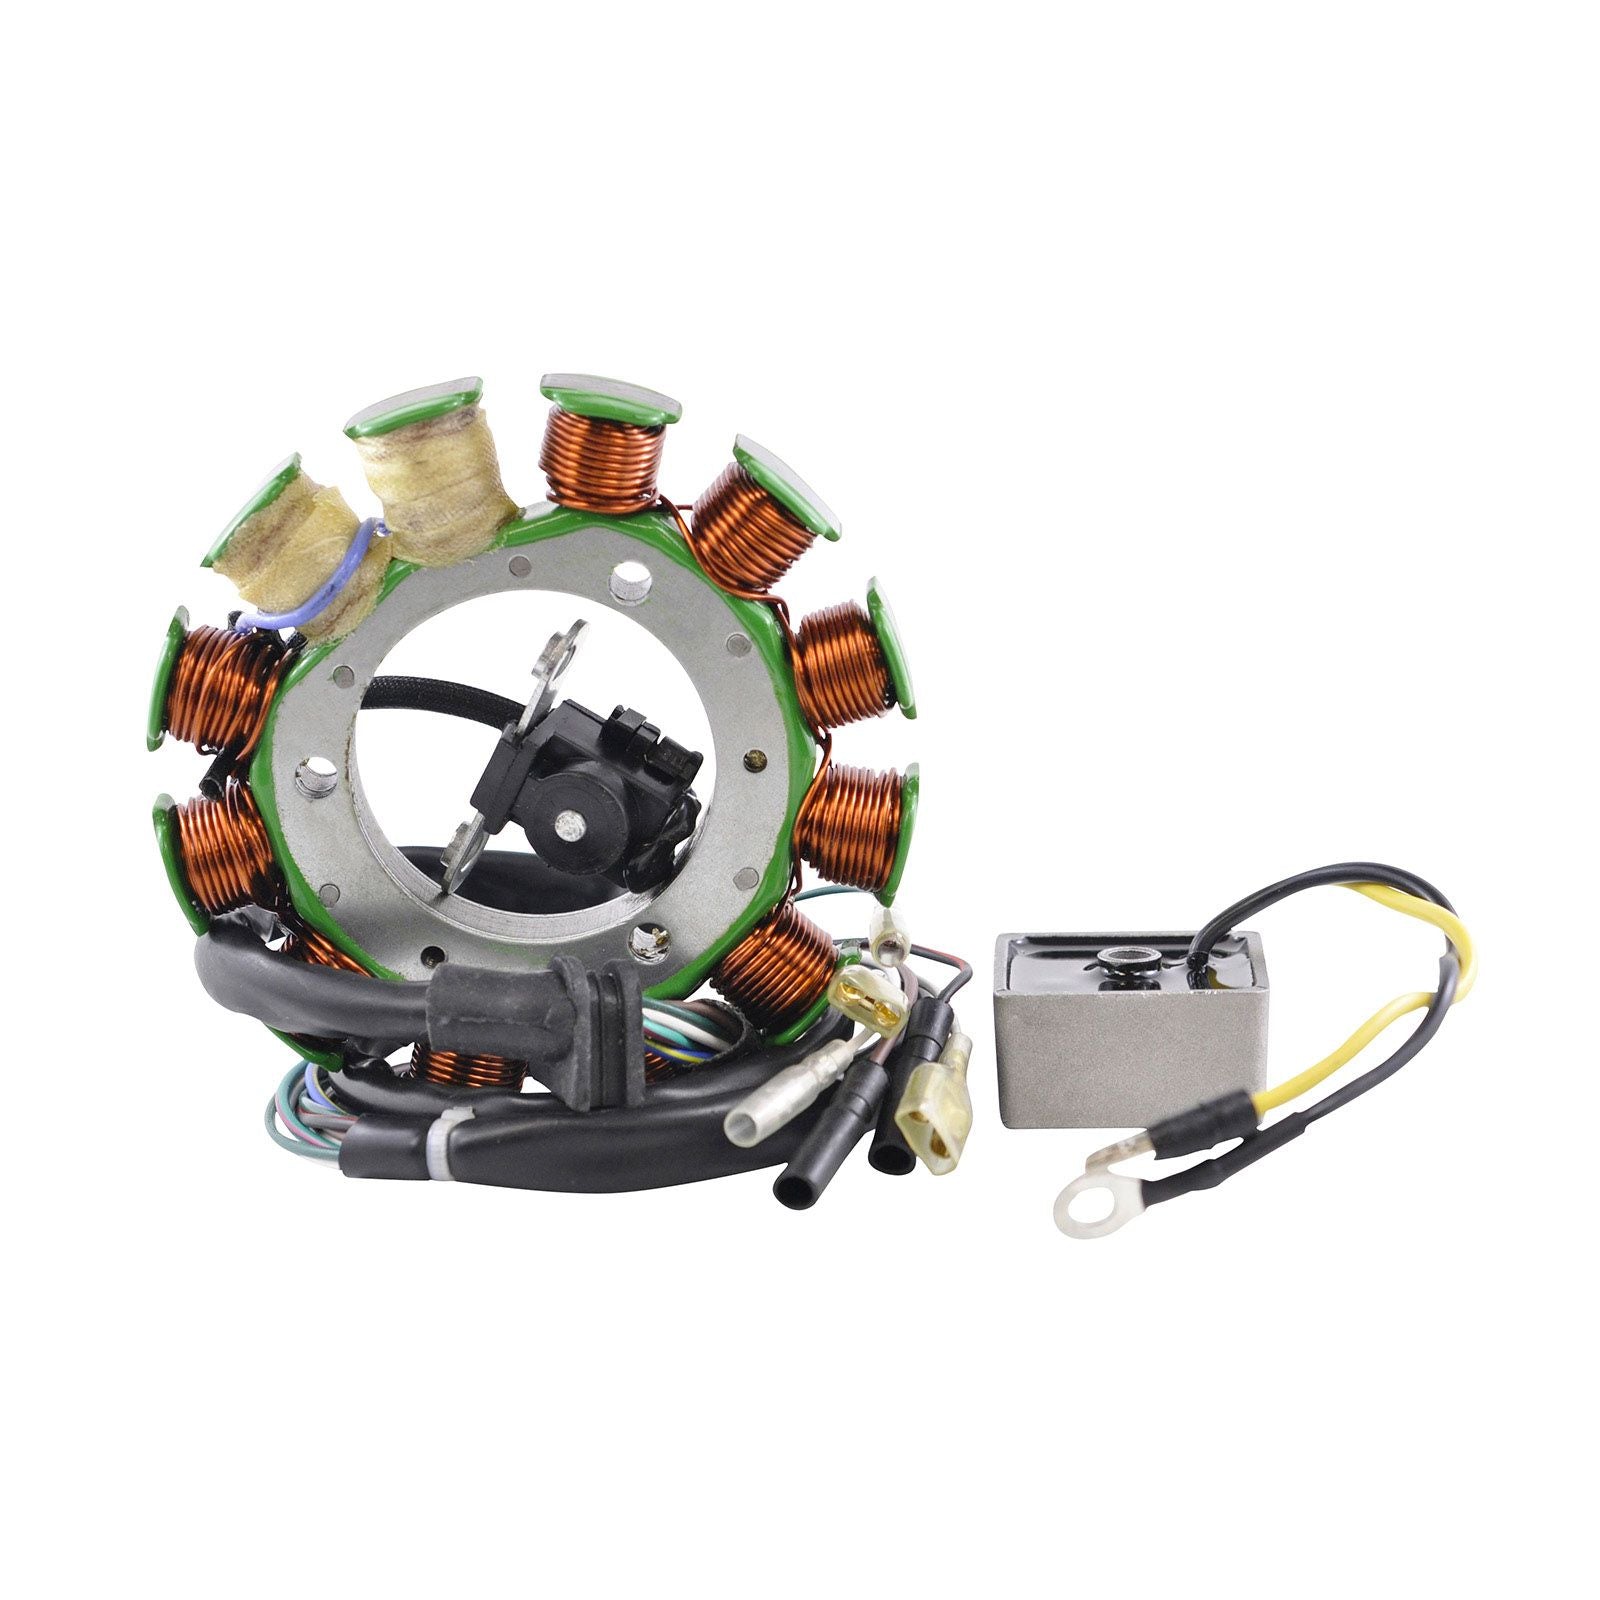 New RMSTATOR HIGH OUTPUT Stator 200W For Honda XR 400/650R 1996-2007 #RMS01023